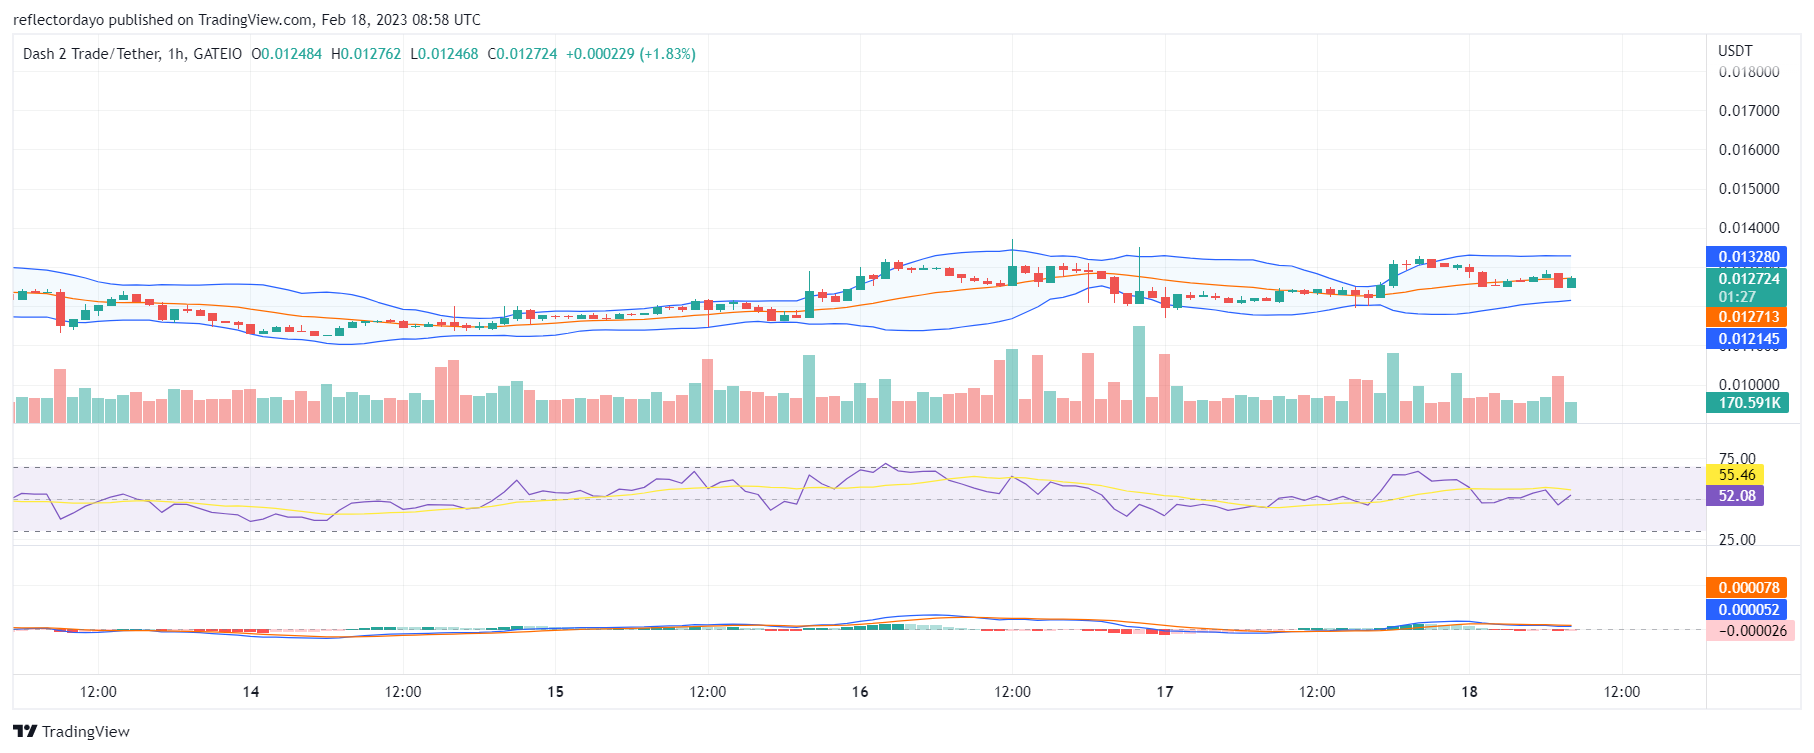 Dash 2 Trade (D2T) Resistance Price Level About to Break as Pressure Increases